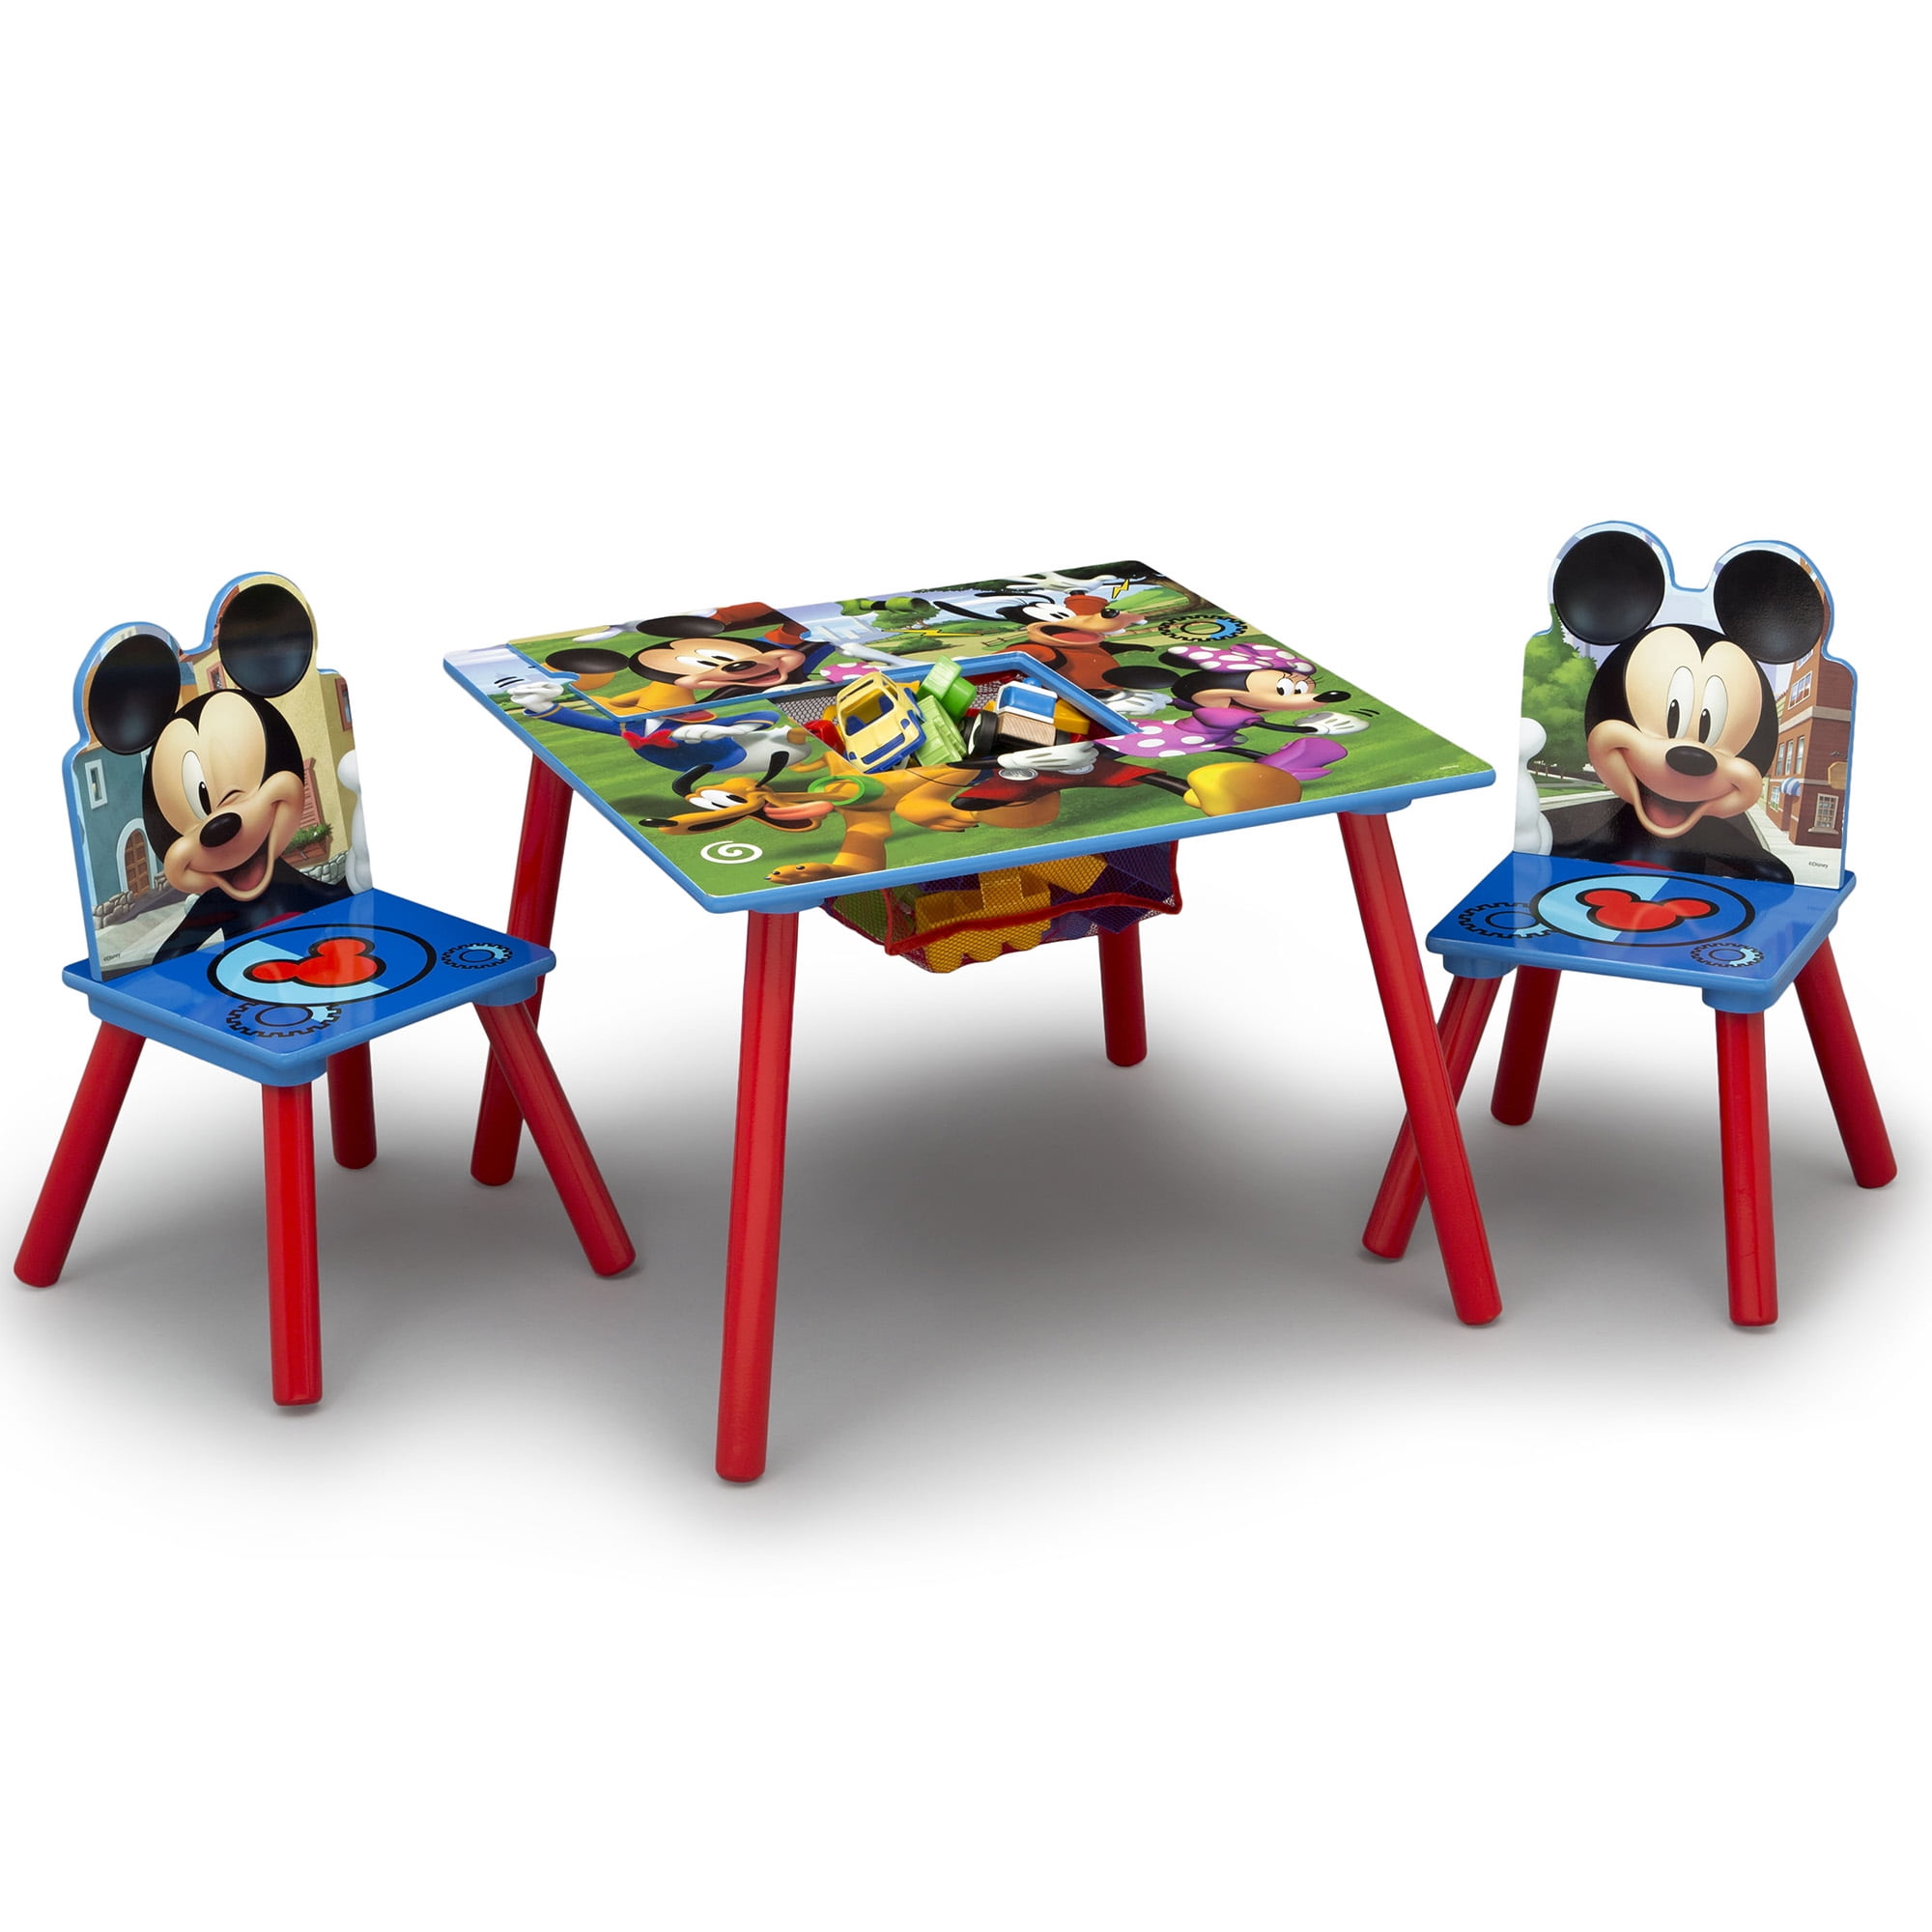 Details about   Kids Desk Disney Minnie Mouse Wood Storage Table and Chairs Set 